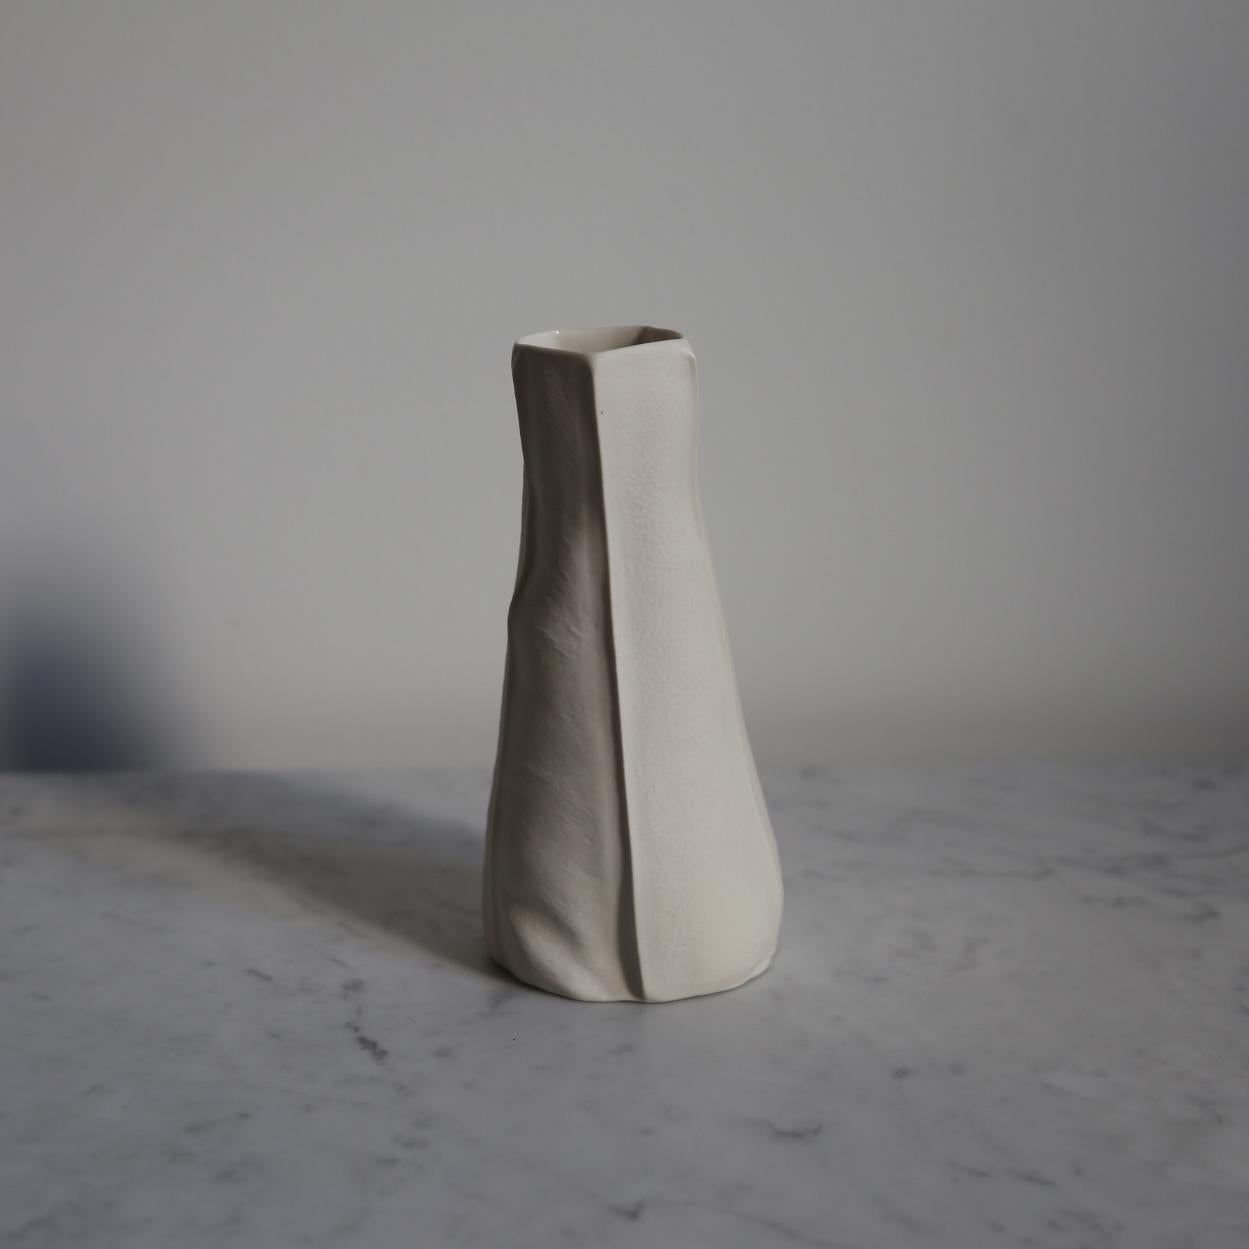 Contemporary Set of Three Unique Kawa Vases and Vessels, Porcelain, Ceramic, in Stock